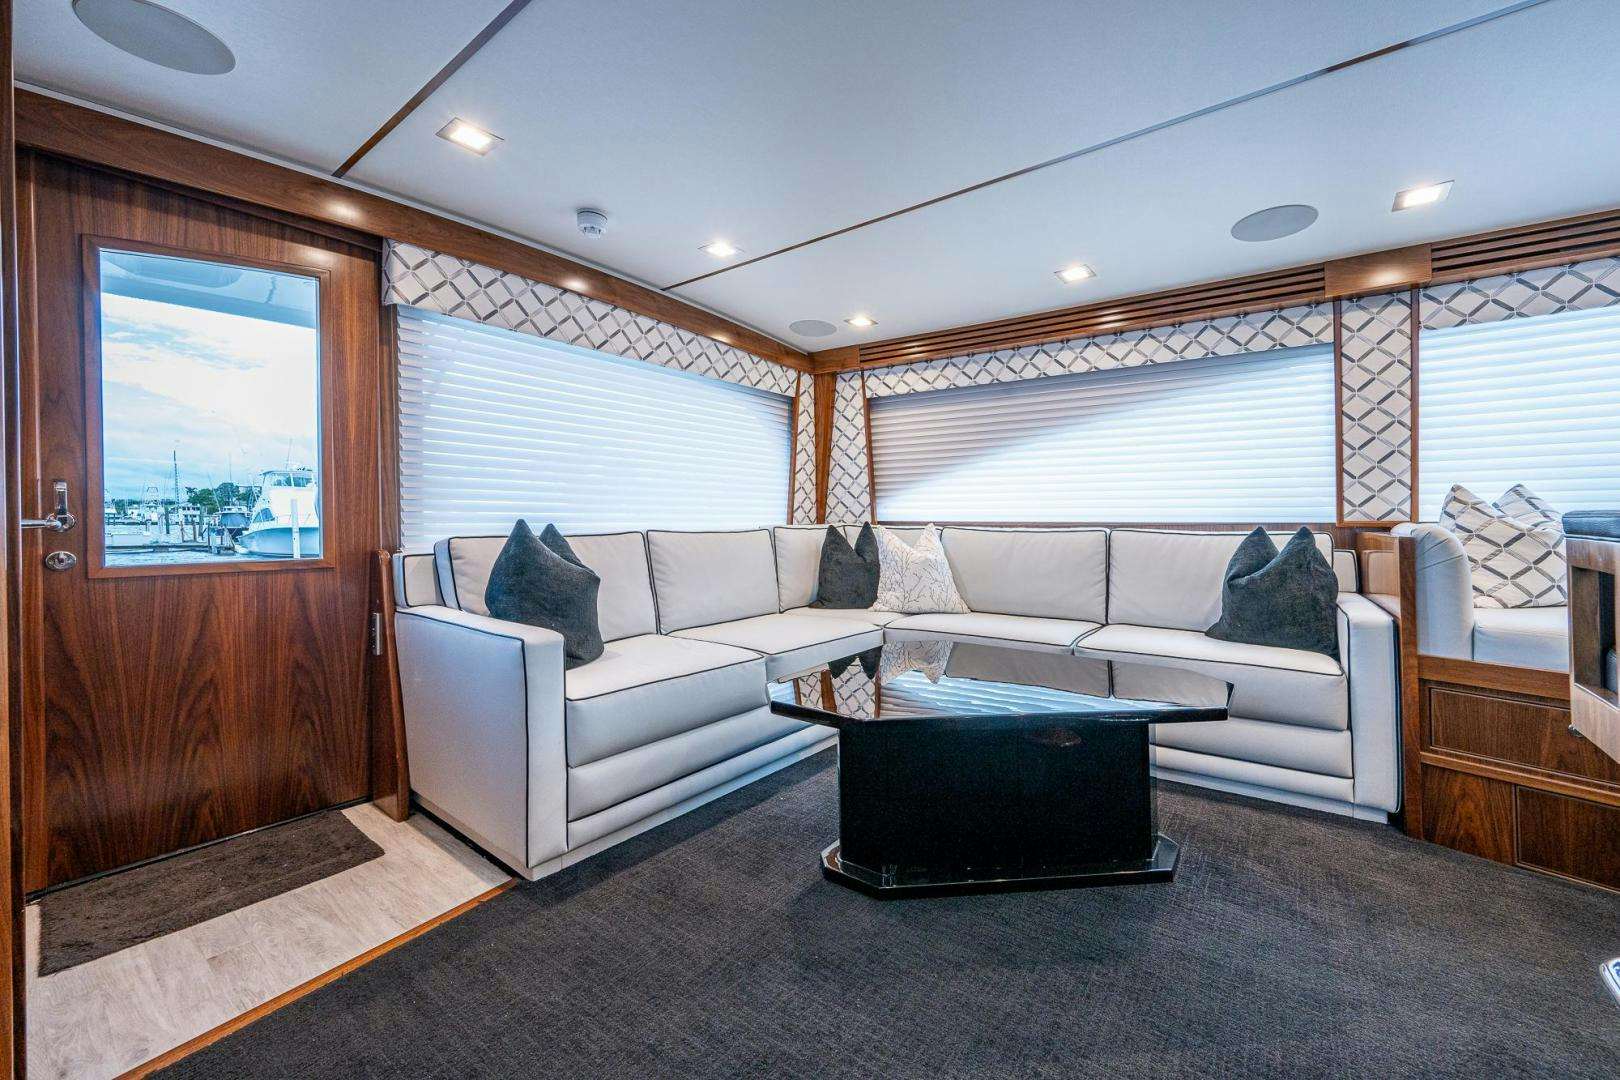 Kemosabe
Yacht for Sale